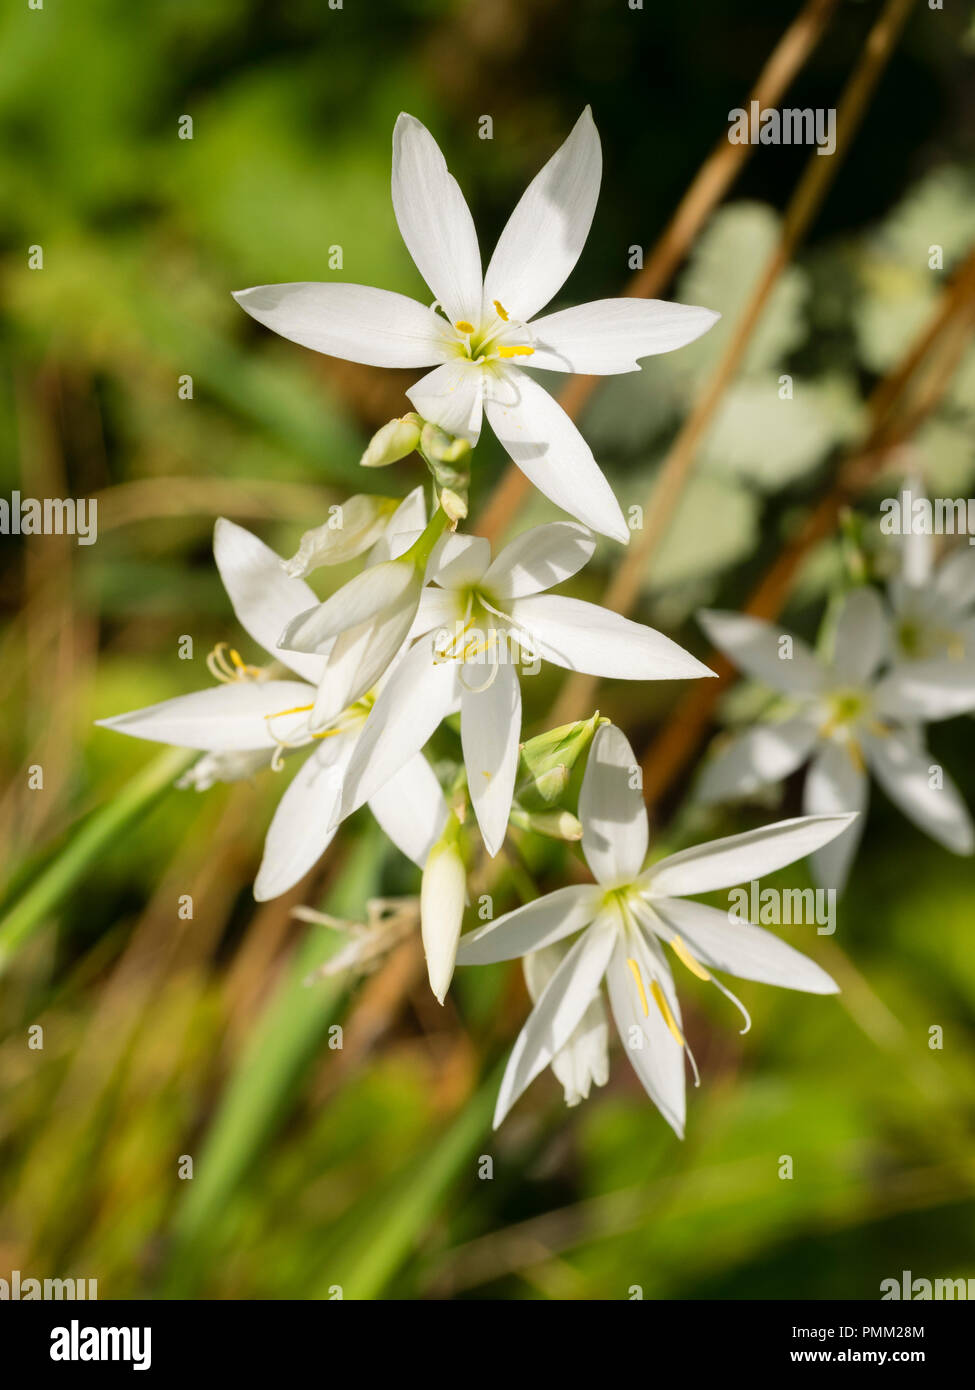 Star like white autumn flowers of the South African Kaffir lily, Hesperantha coccinea 'Alba' Stock Photo